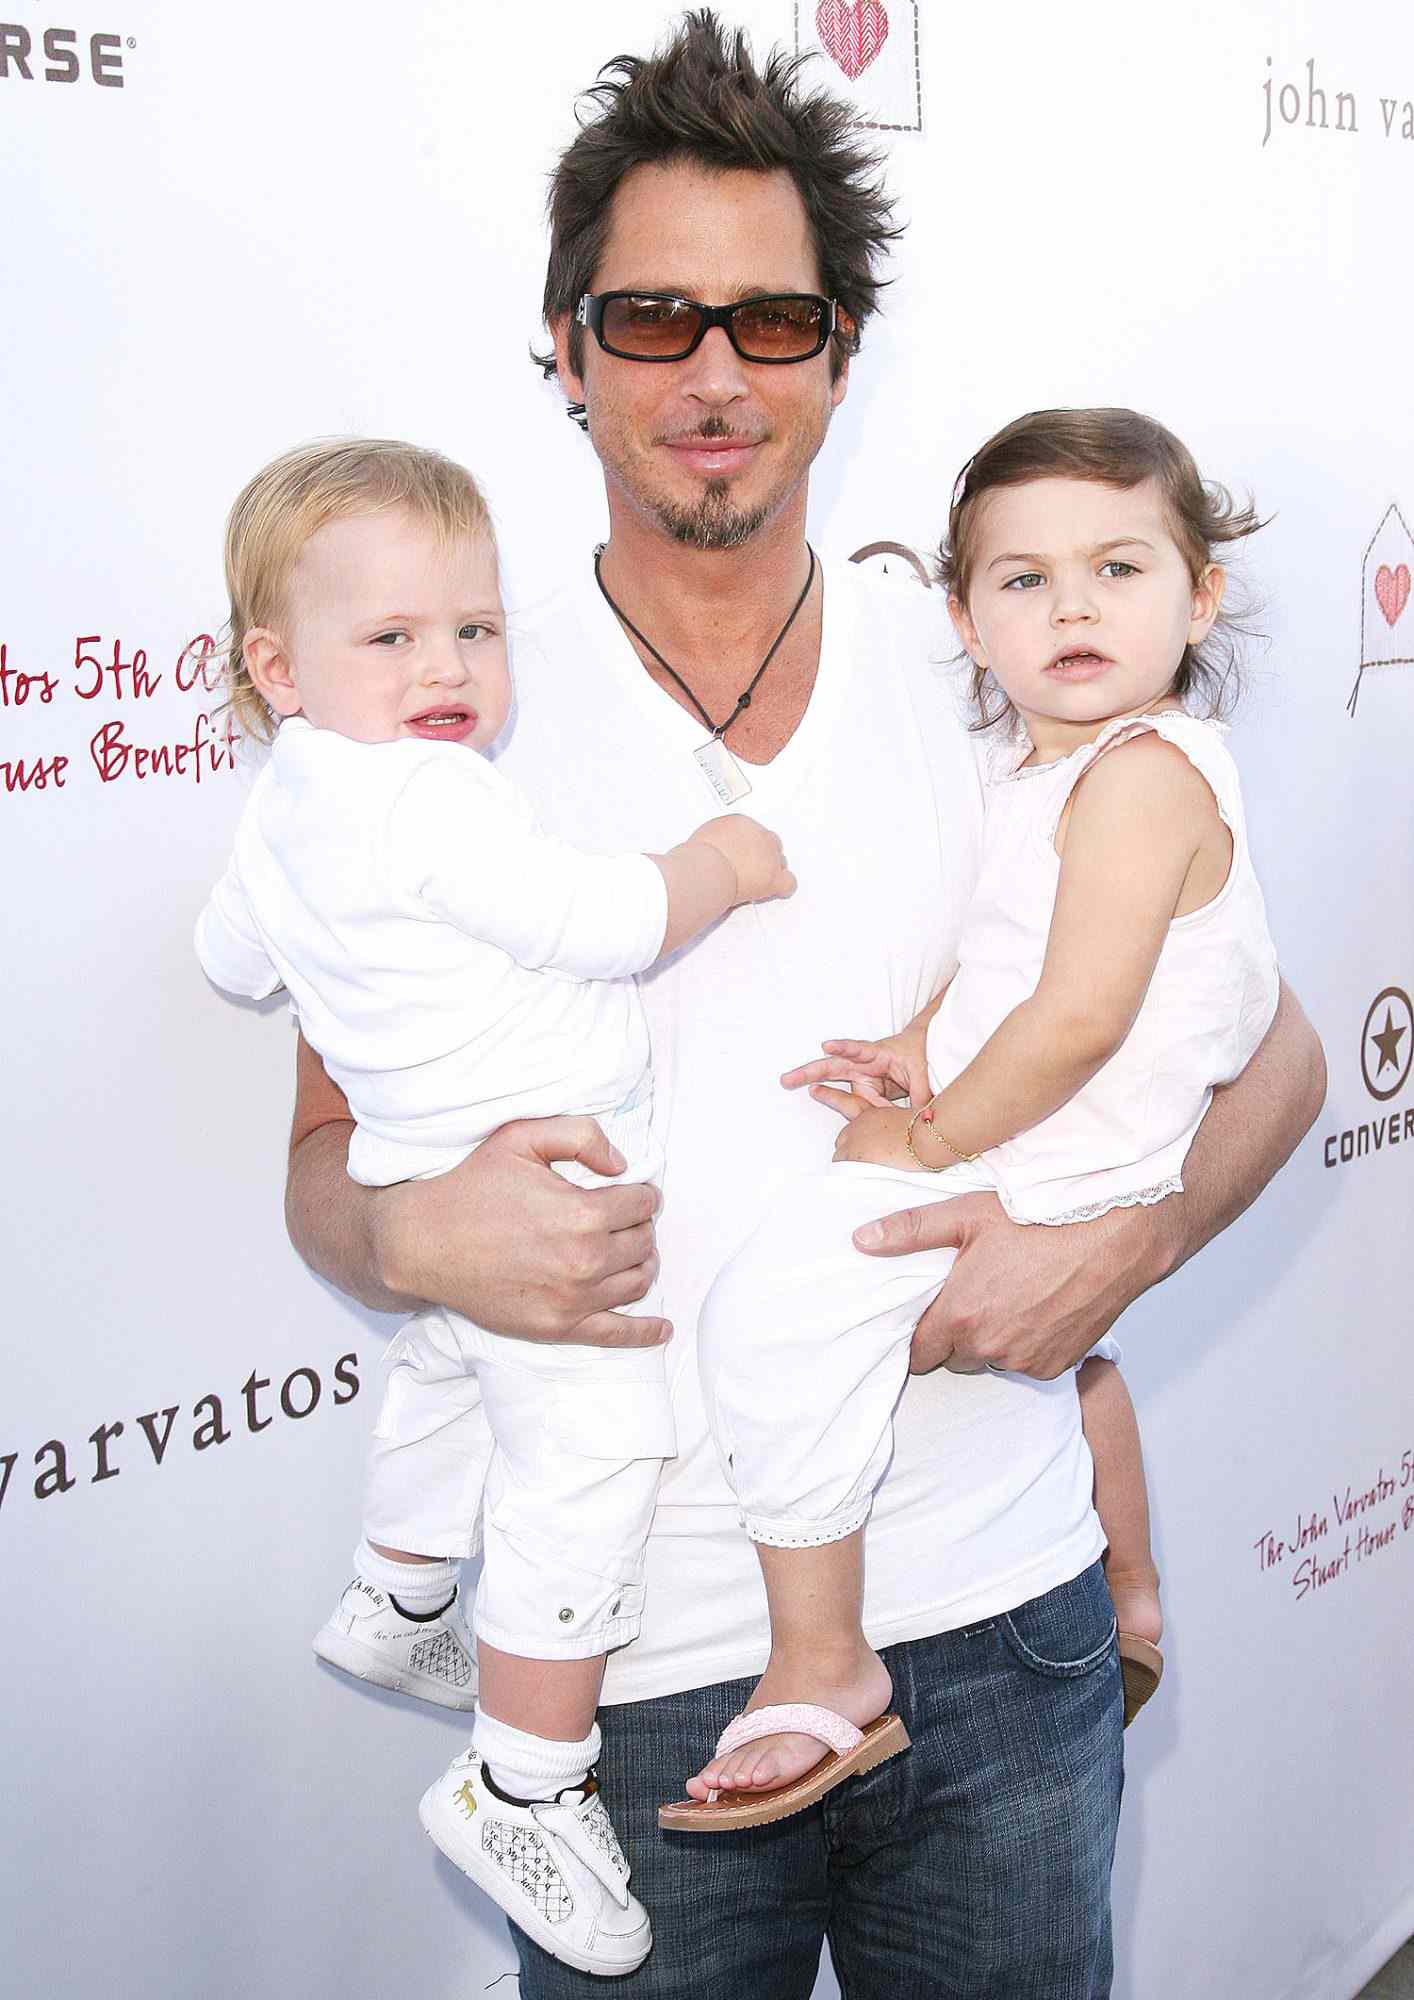 5th Annual John Varvatos Stuart House Benefit Presented by Converse